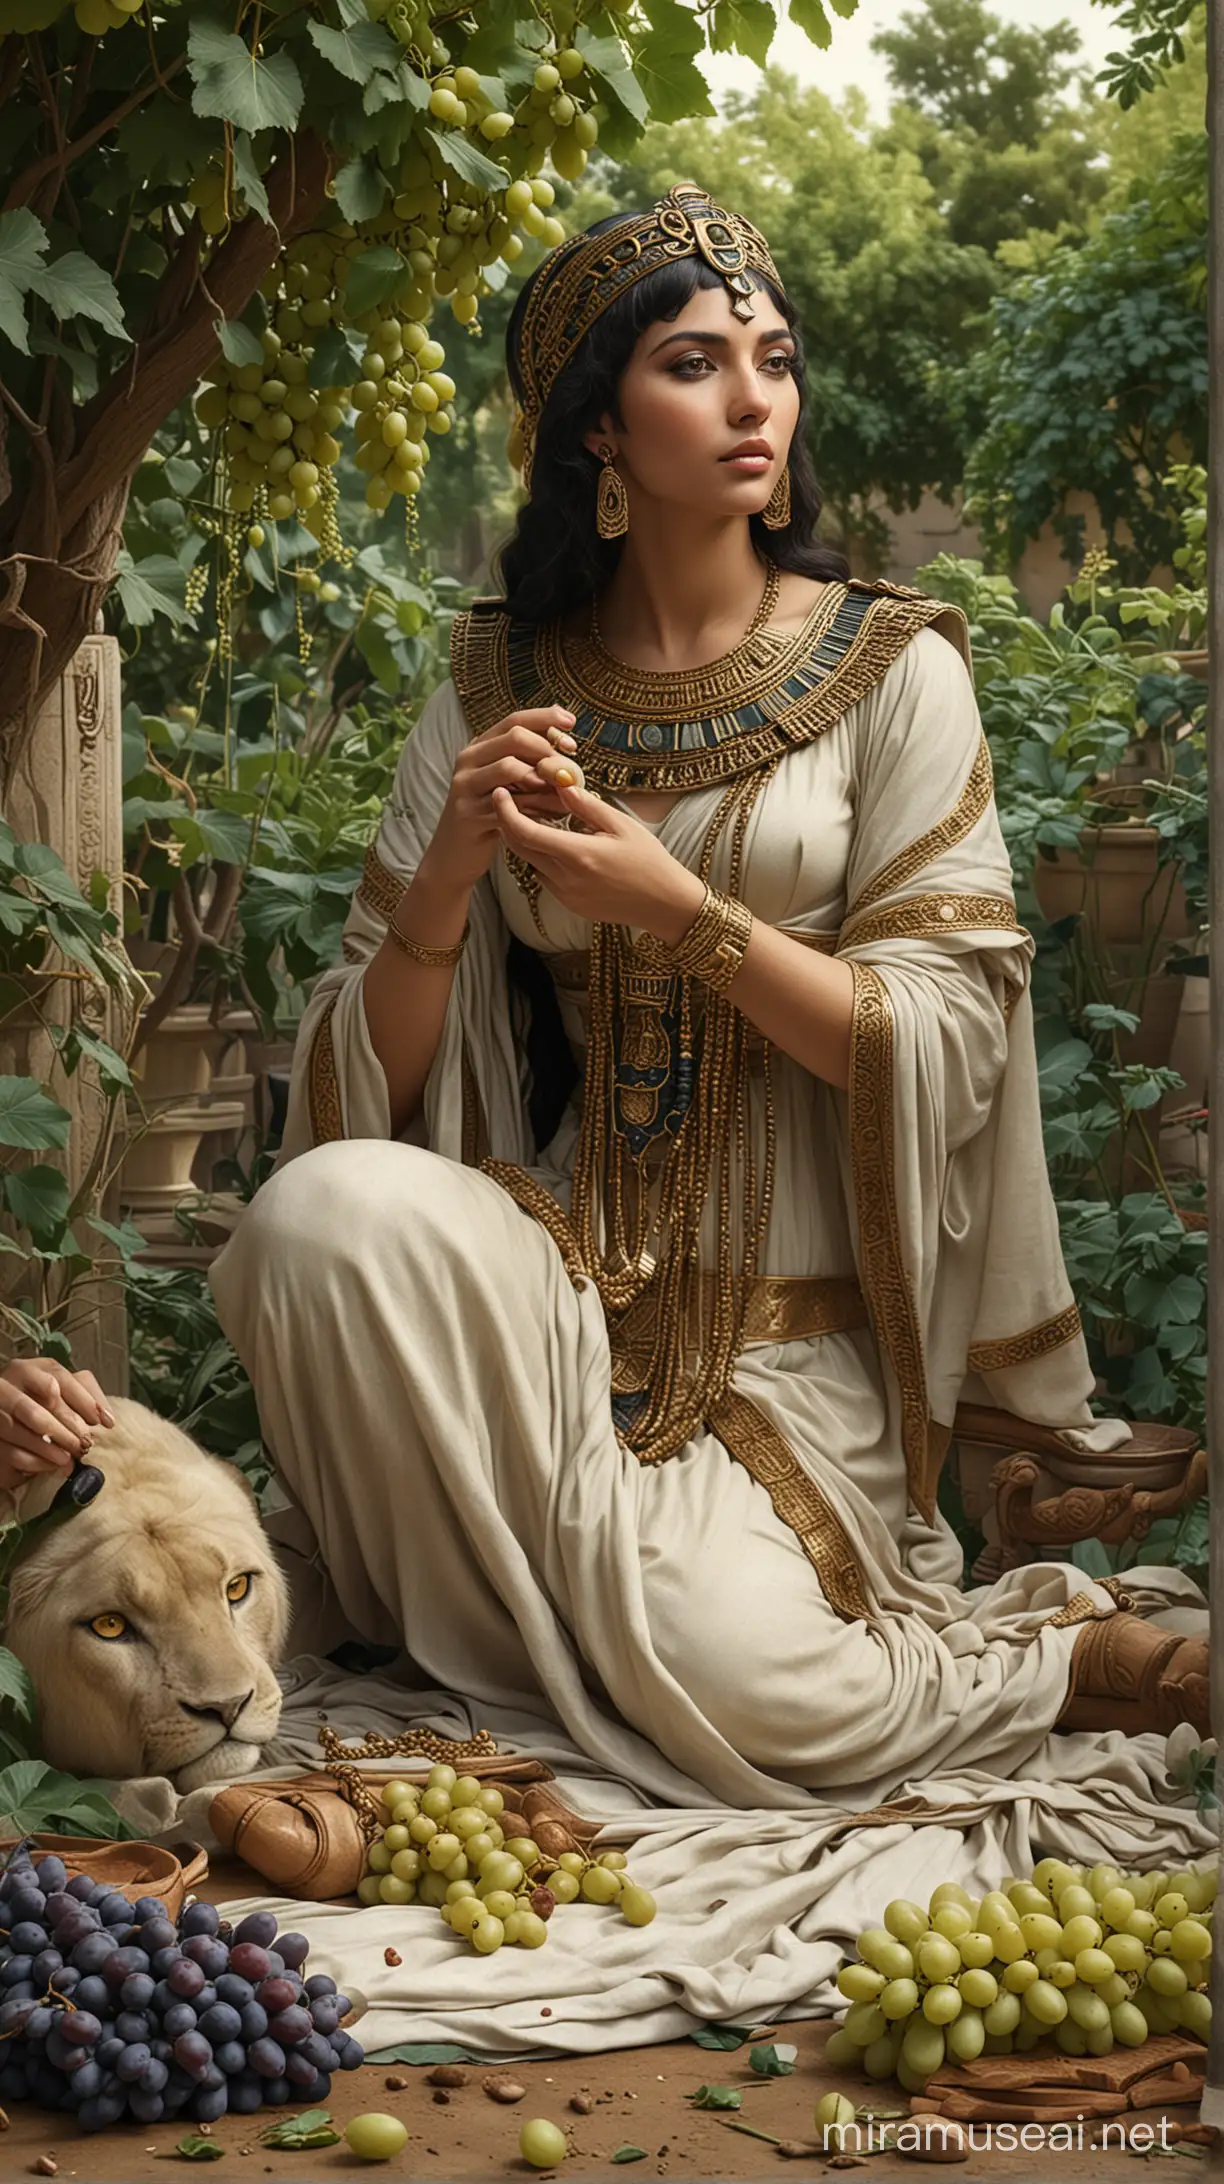 Cleopatra eating grapes in the garden. Her servants are around and comforting her. Hyper realistic image.